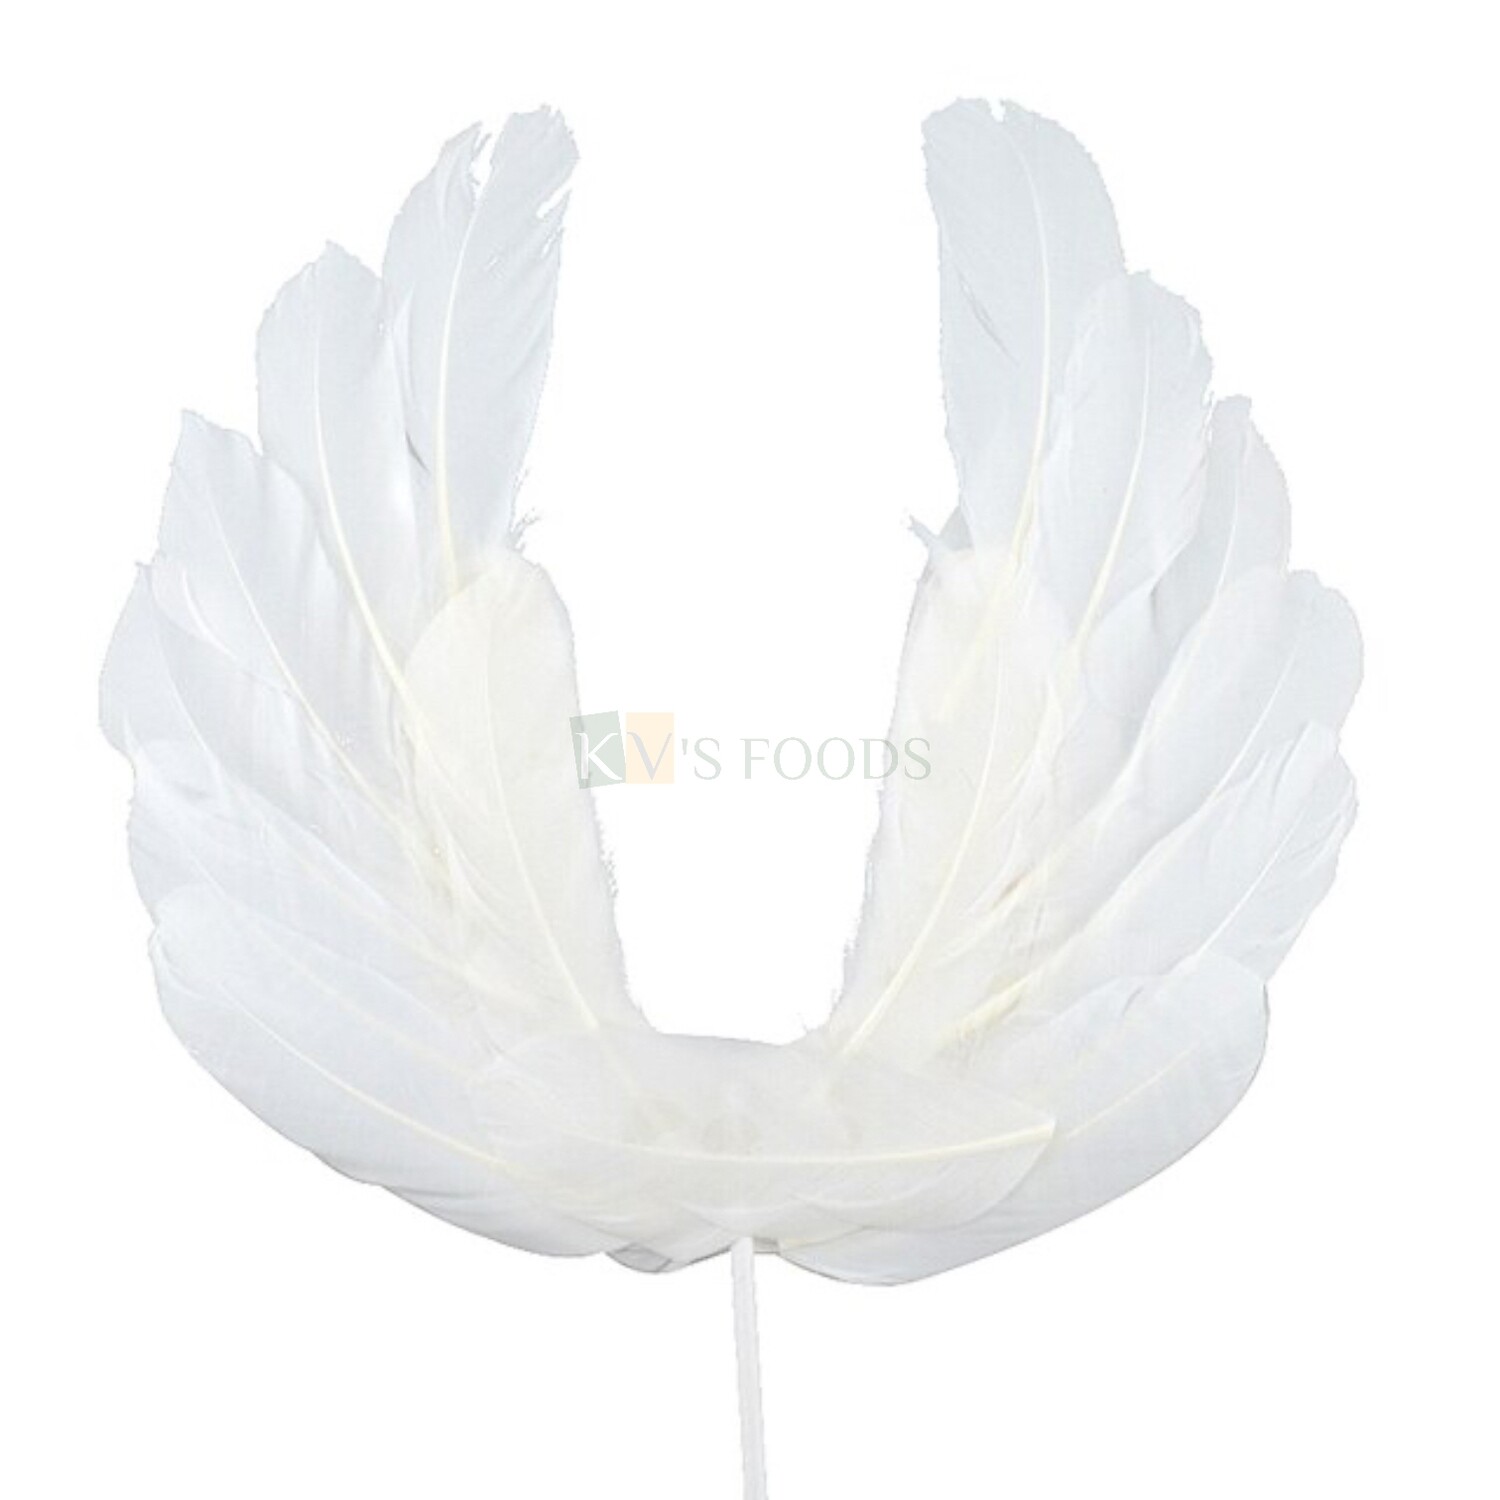 1PC White Angel Wing Feather Cake Topper Insert, Reusable Cake Topper, Decorations Items, Cake Decoration Accessories, DIY Cake Decor